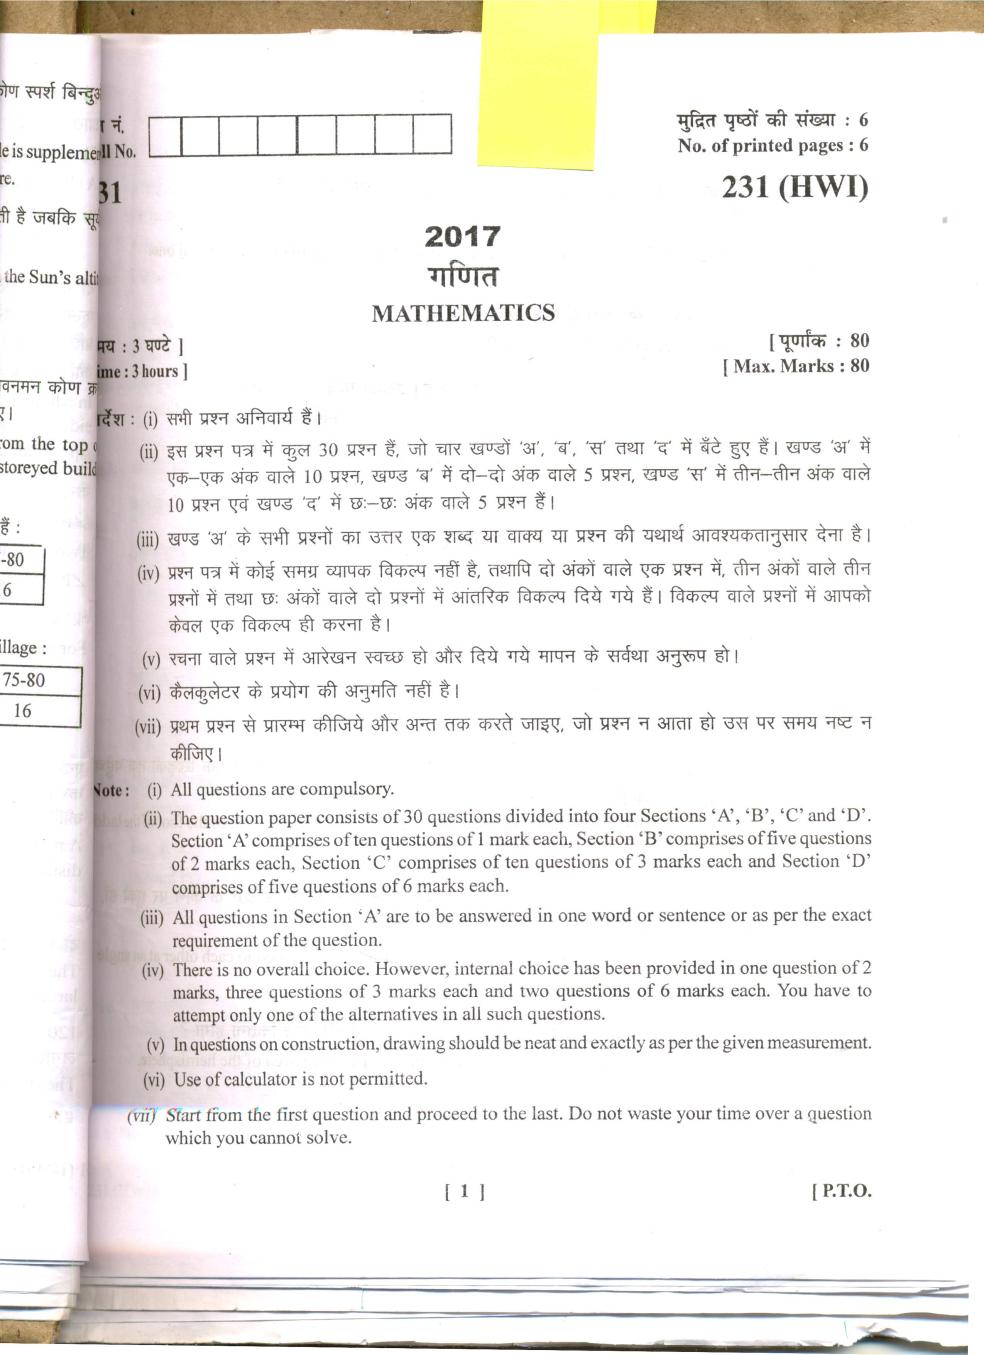 Uttarakhand Board Class 10 Question Paper 2017 for Mathematics-2 - Page 1